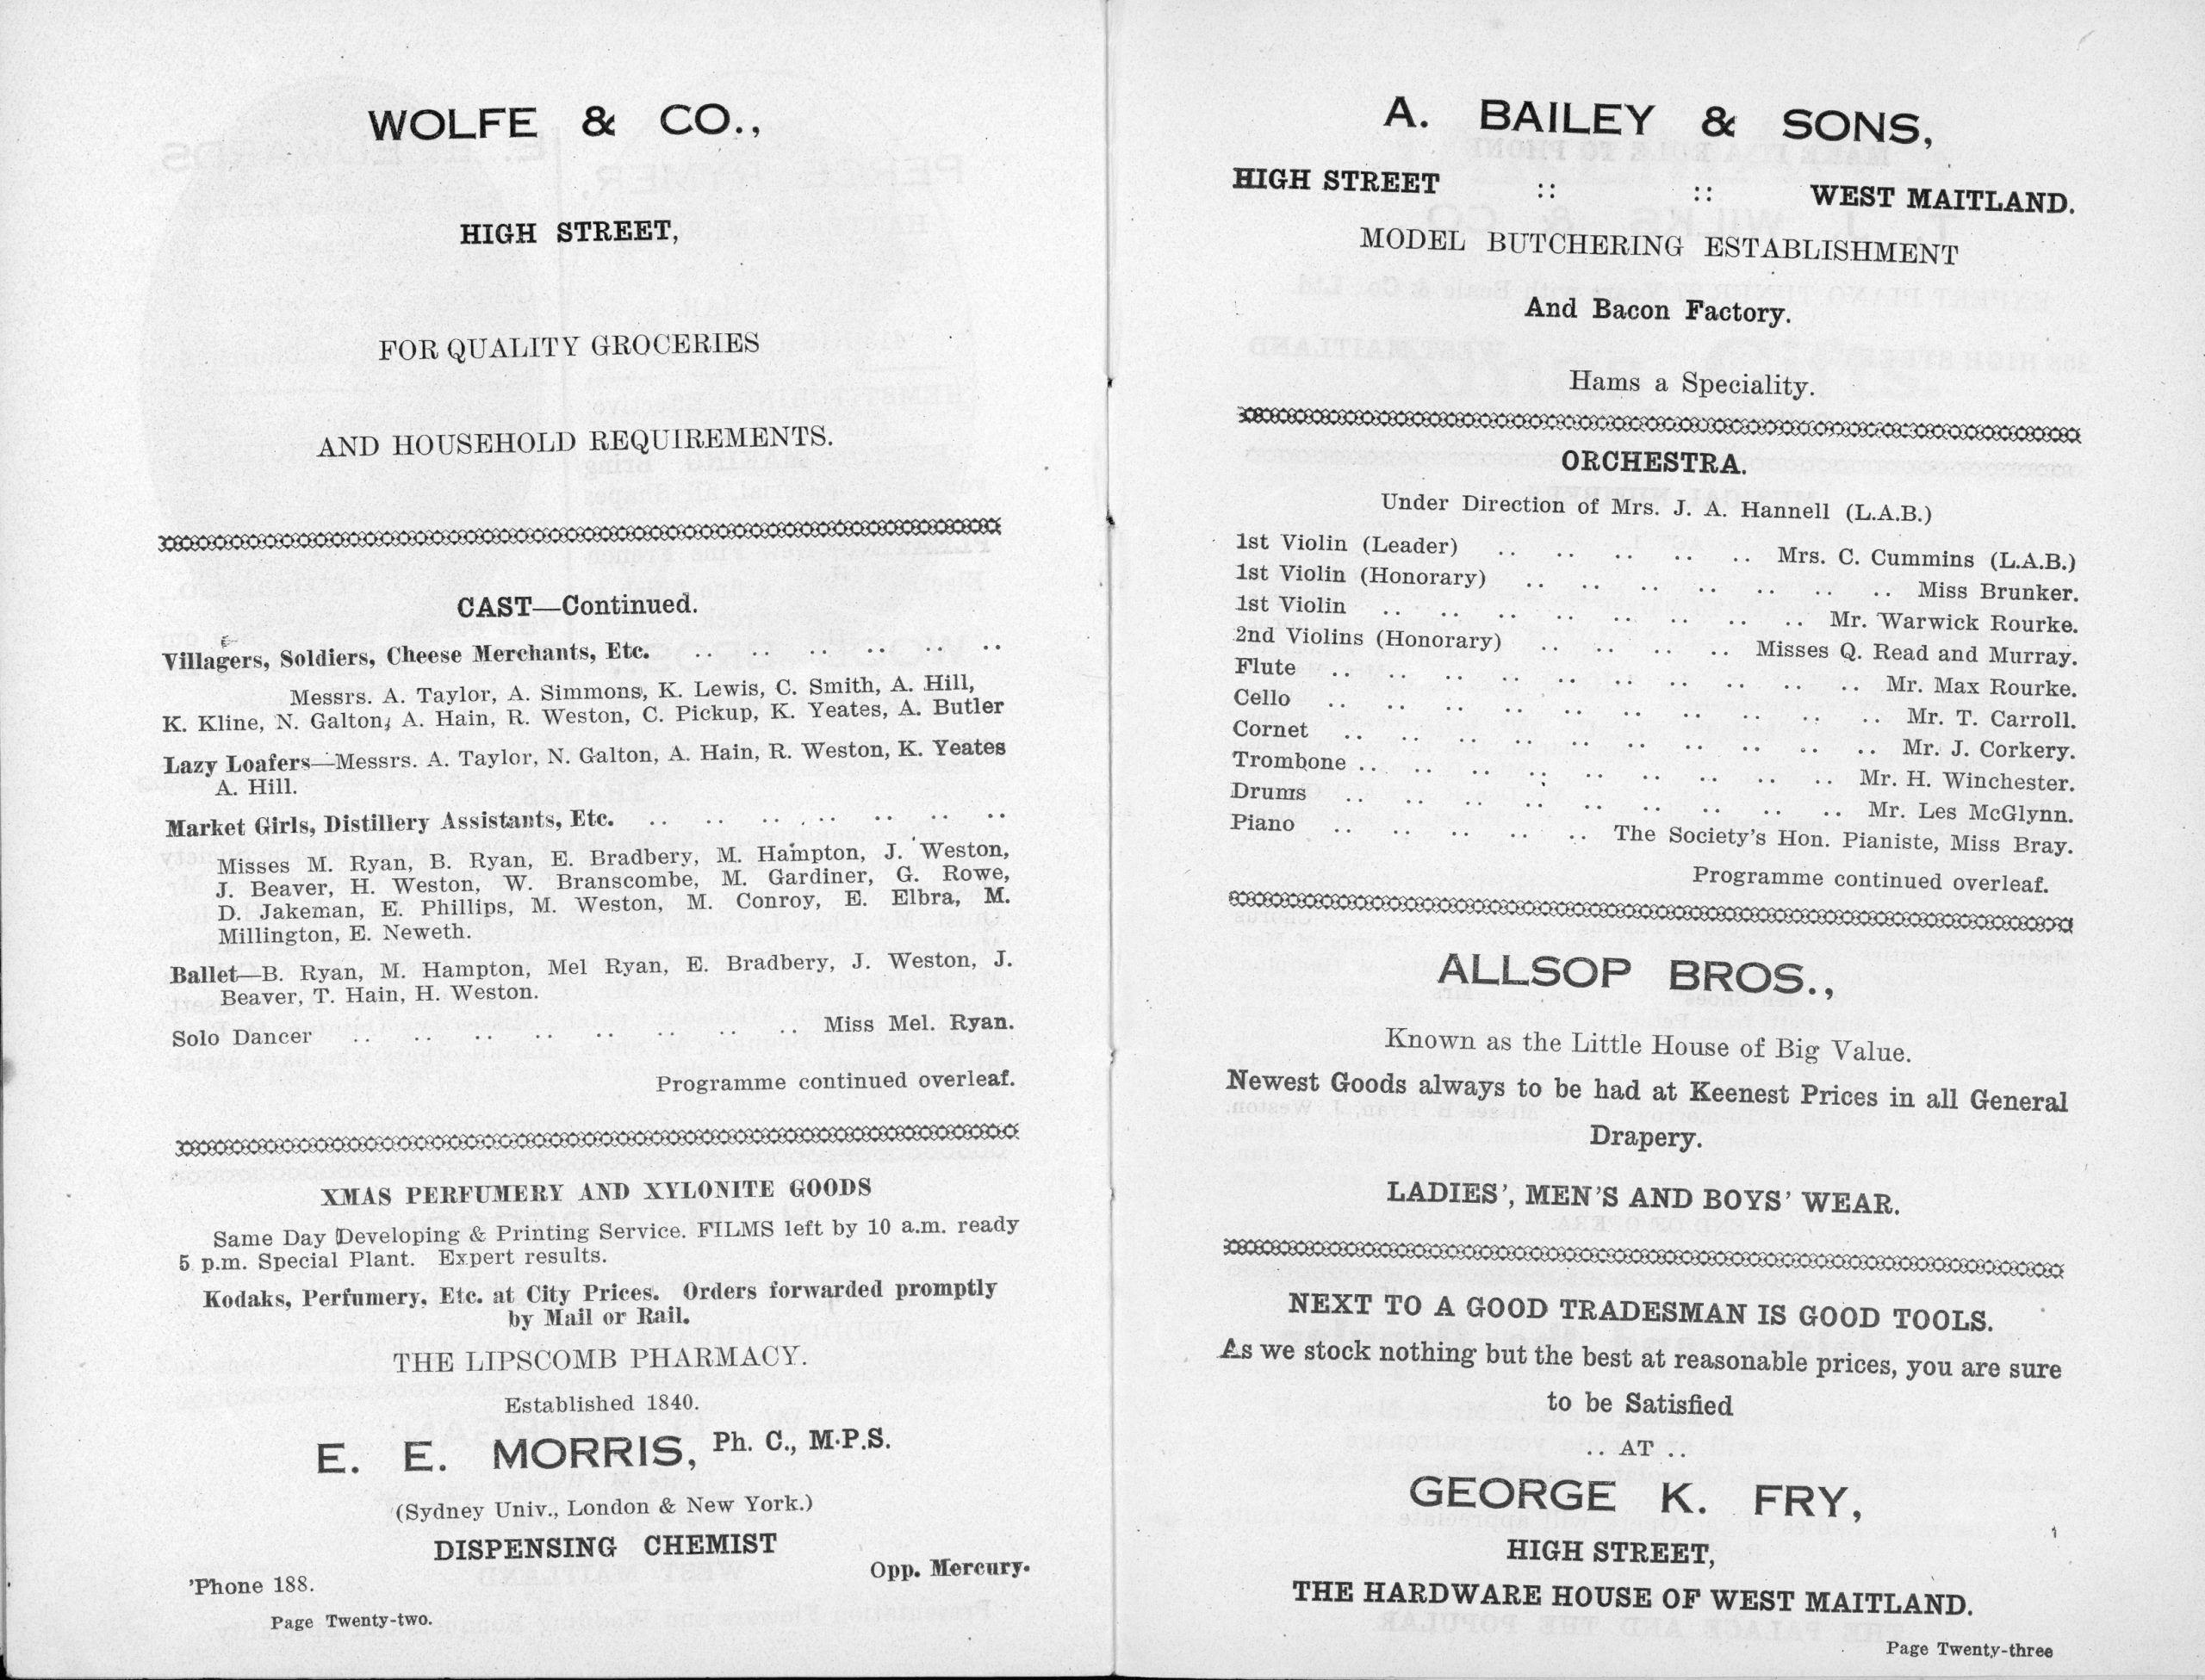 Cast and ochestra list amid text advertisements for a grocery store, Wolfe & Co., and butcher, A. Bailey & Sons.